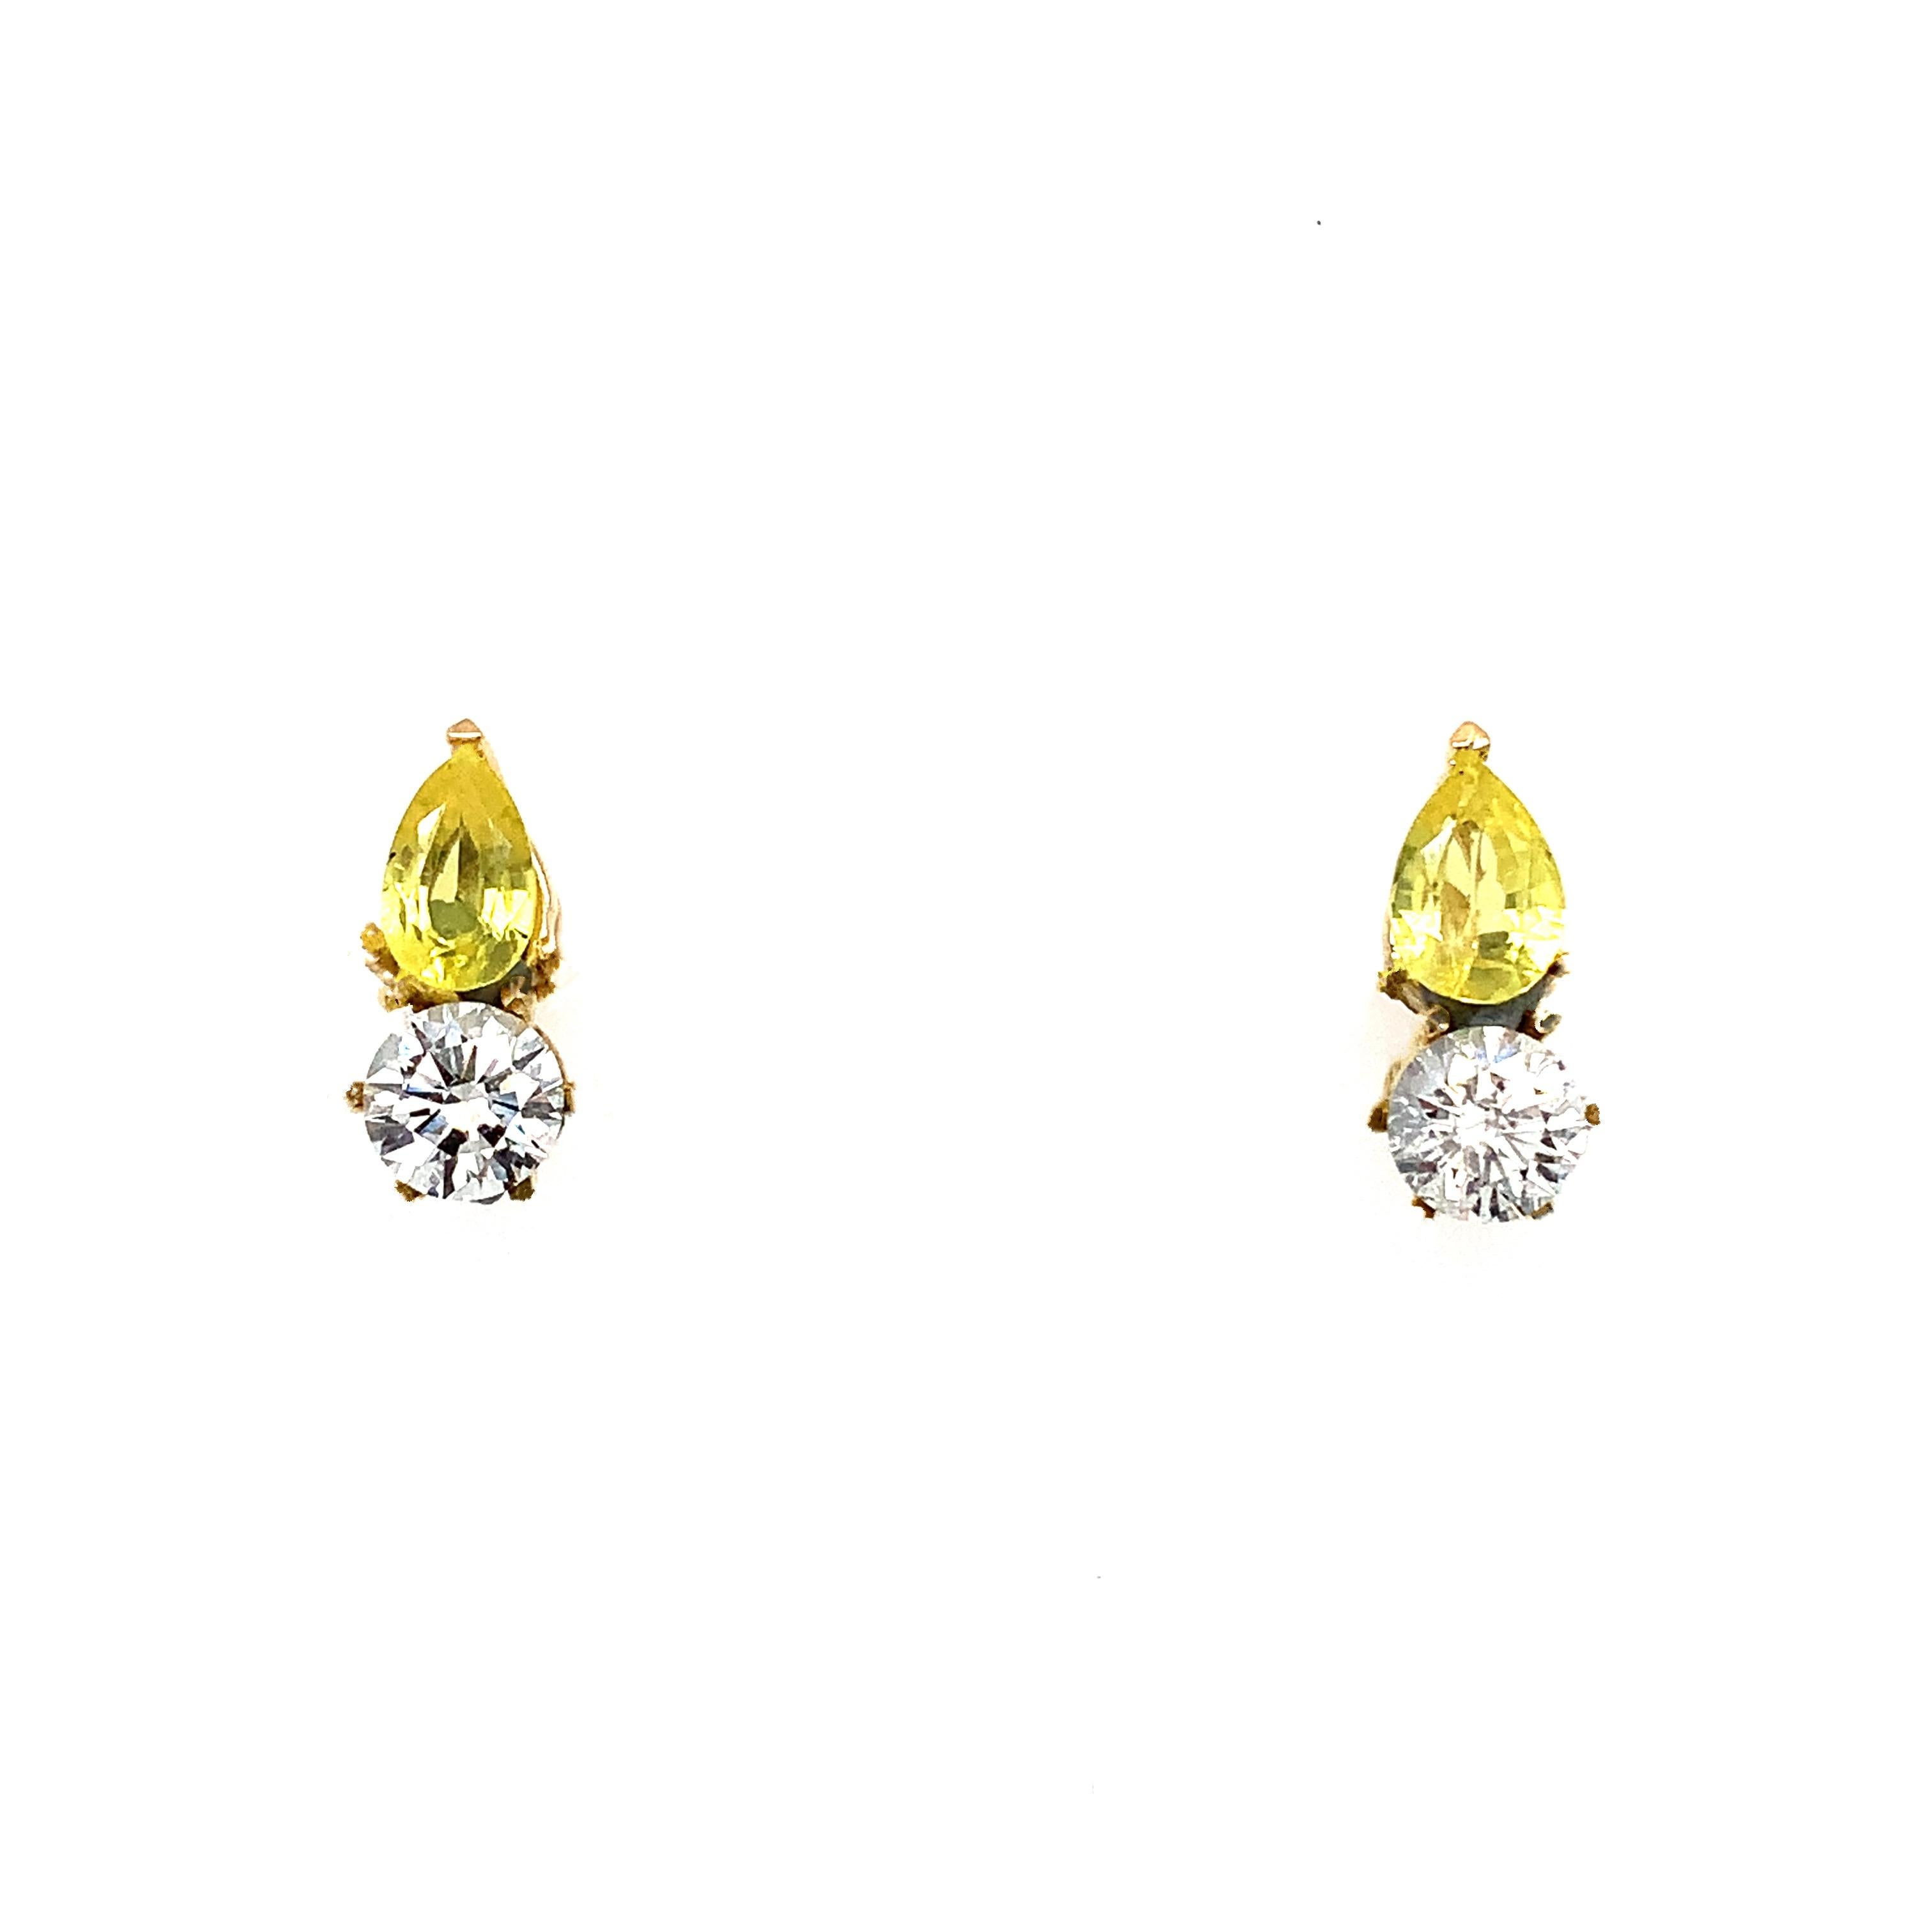 Diamond and yellow sapphire art deco stud earrings 118k yellow gold In New Condition For Sale In London, GB